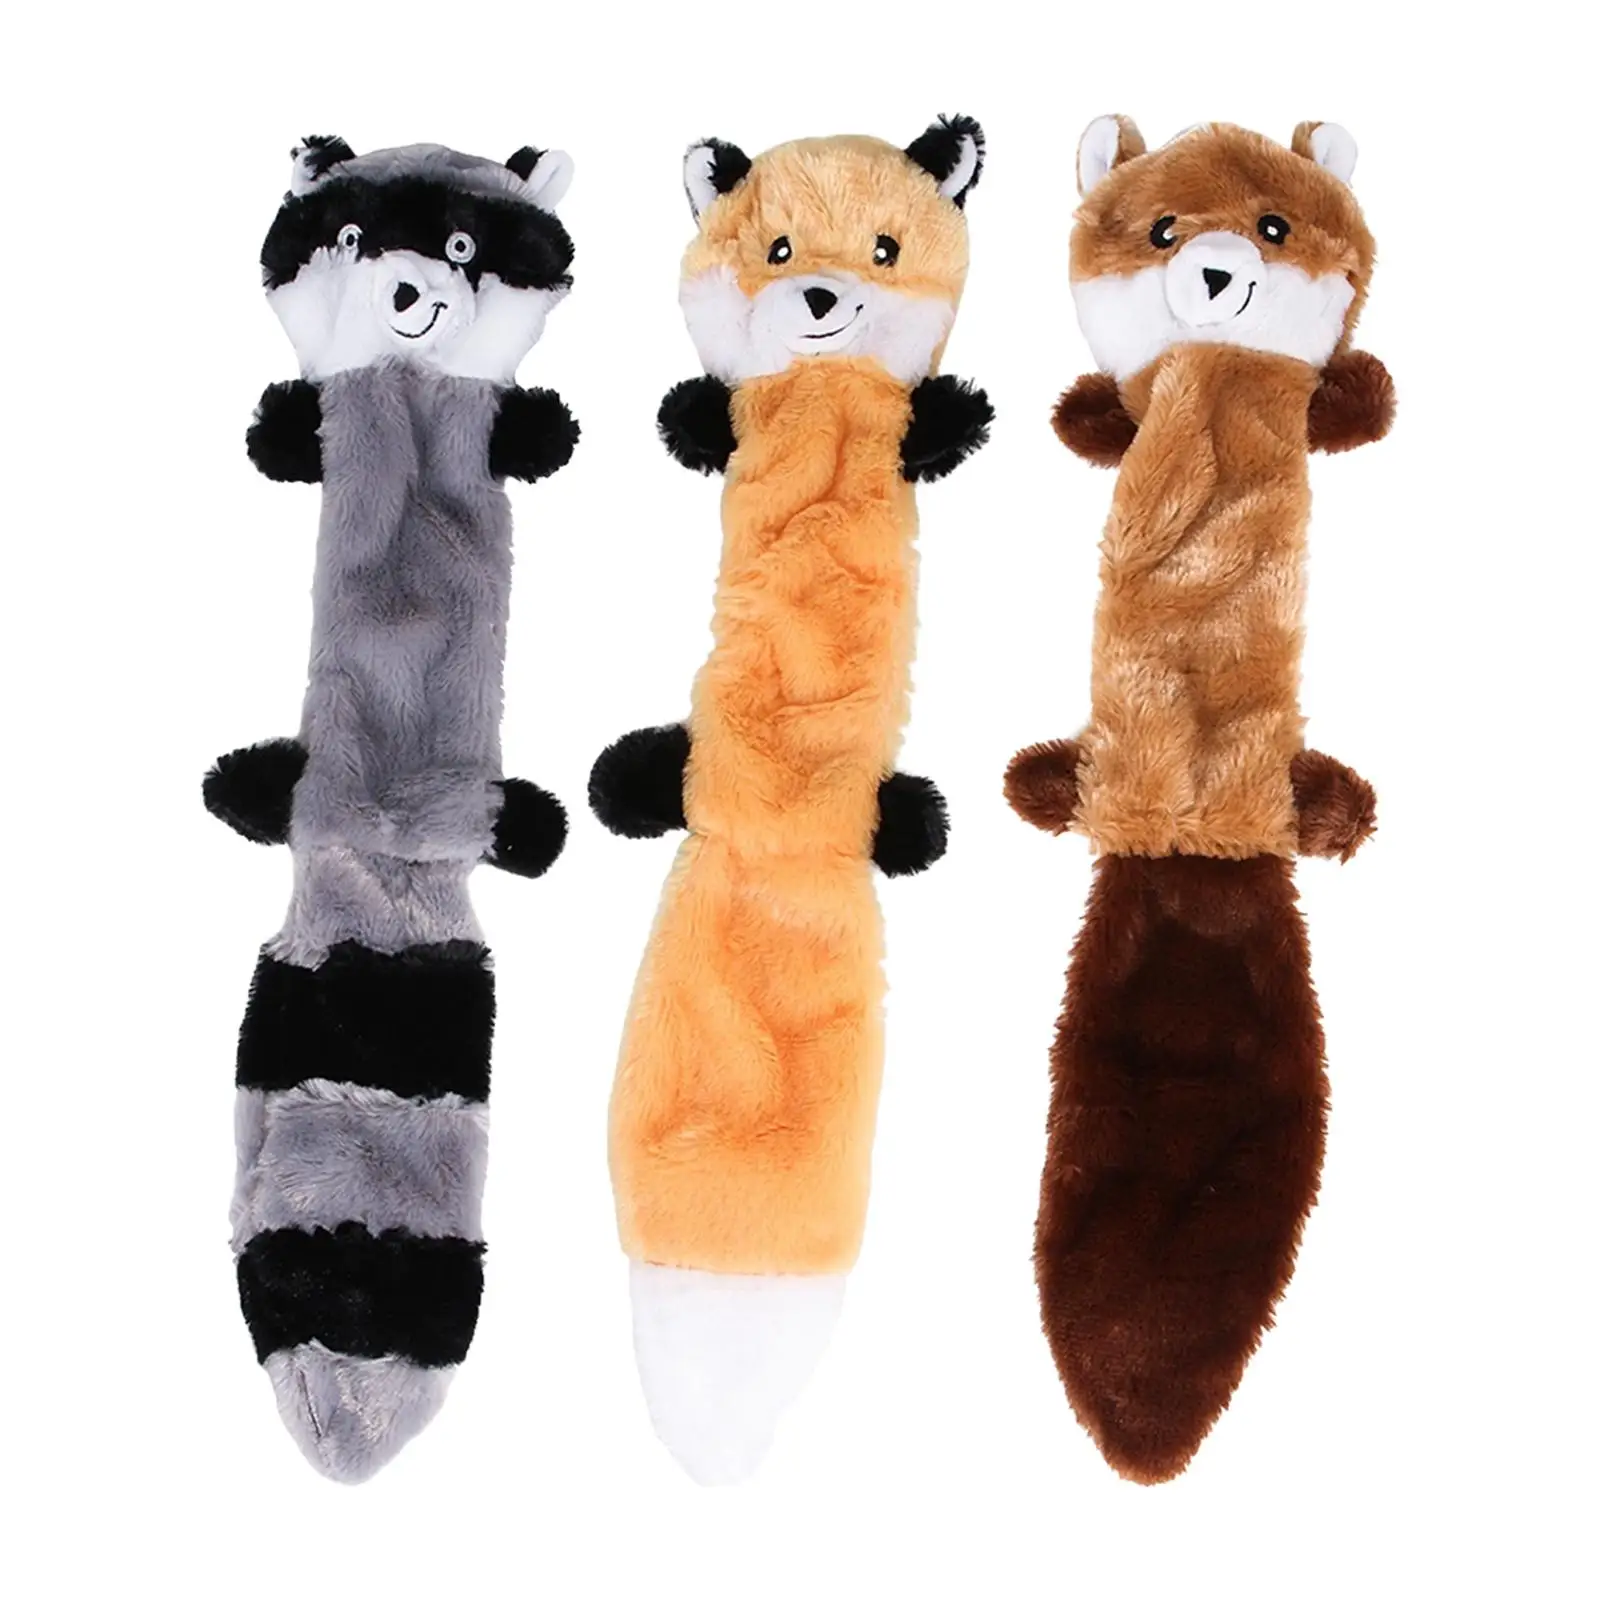 Squeaky Dog Toy Pet Training Supplies Cute Funny for Aggressive Chewers Play No Stuffing Plush for Small Medium Large Dog Pets